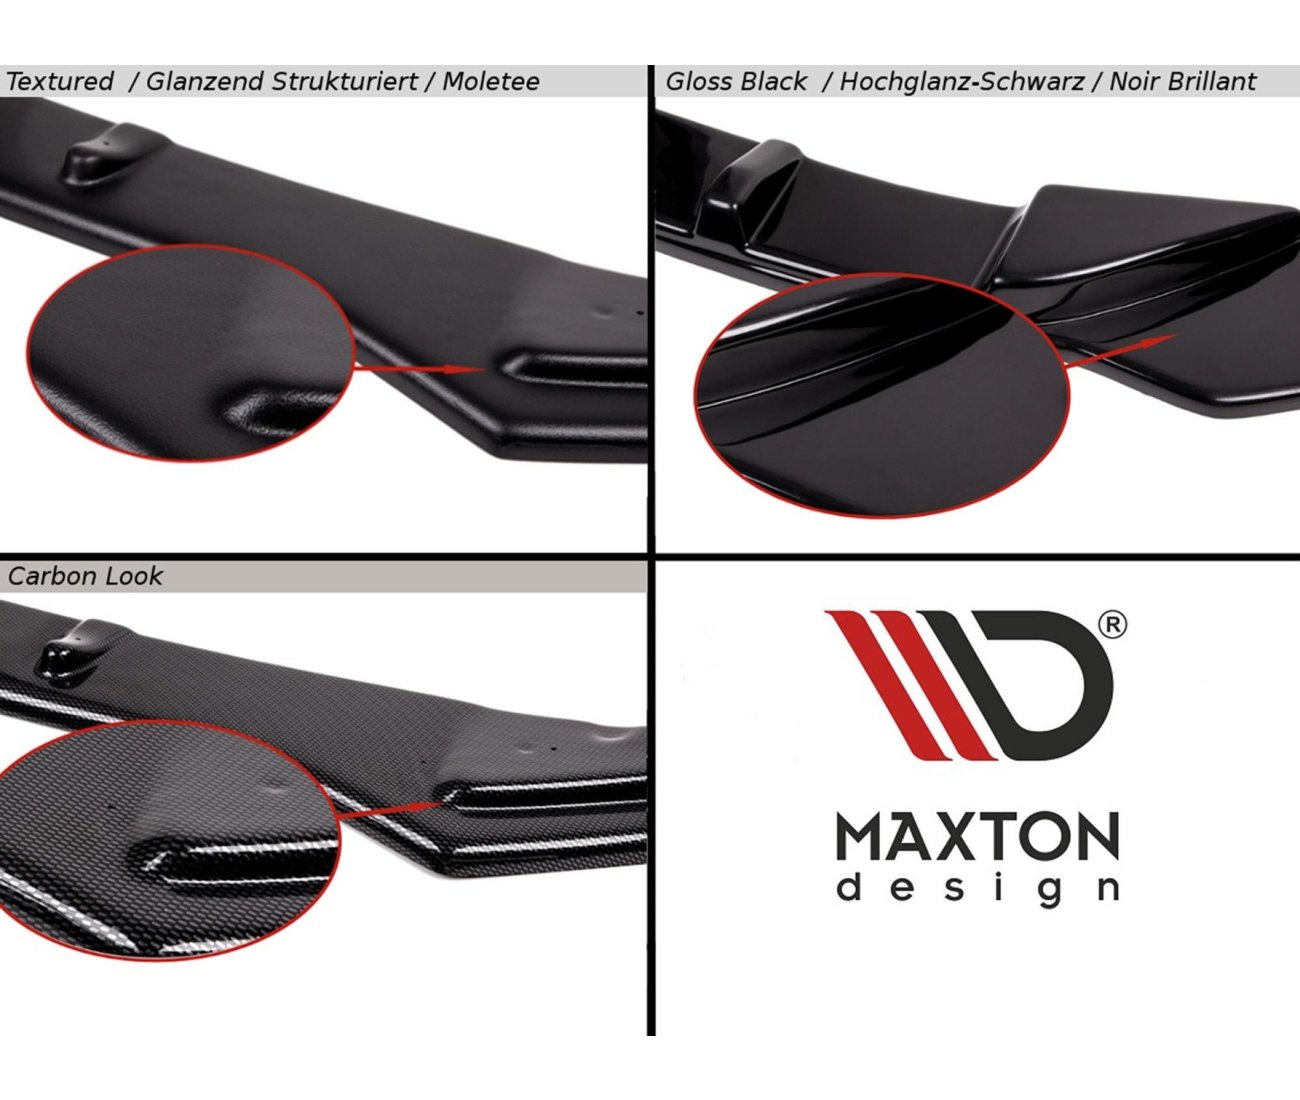 MAXTON DESIGN diffuser for Mercedes-AMG GT 63 S 4-door coupe